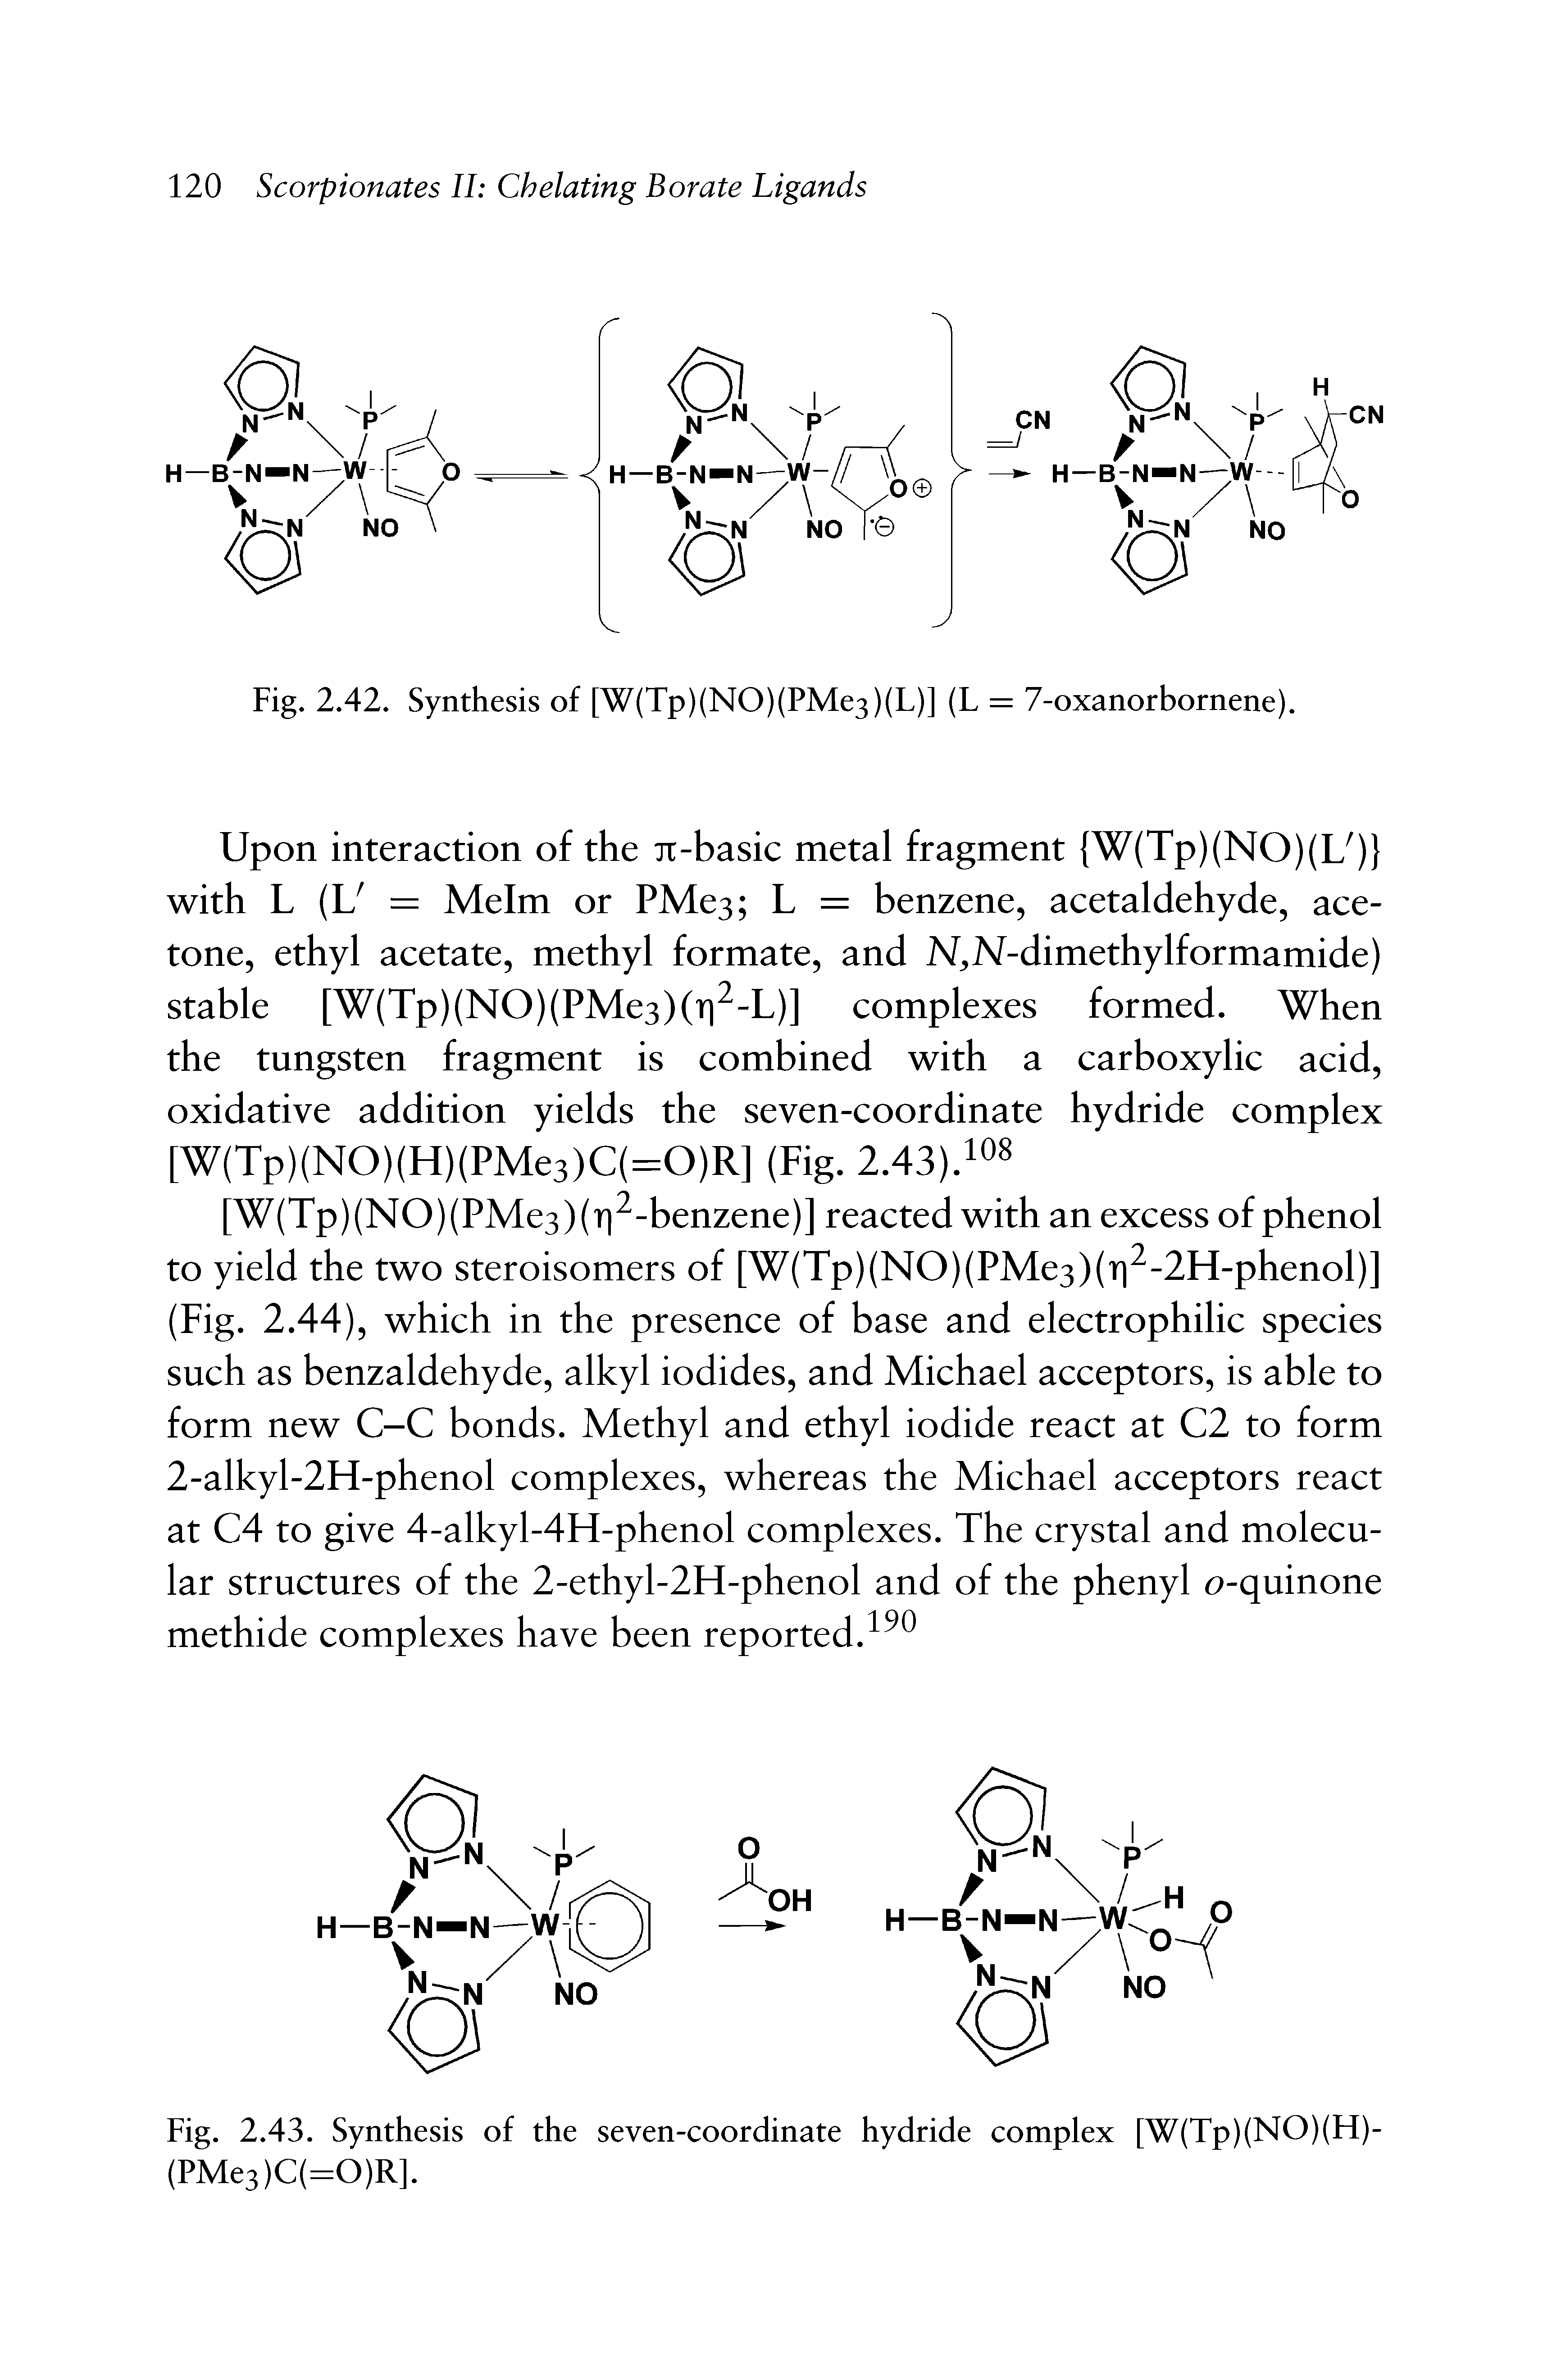 Fig. 2.43. Synthesis of the seven-coordinate hydride complex [W(Tp)(NO)(H)-(PMe3)C(=0)R],...